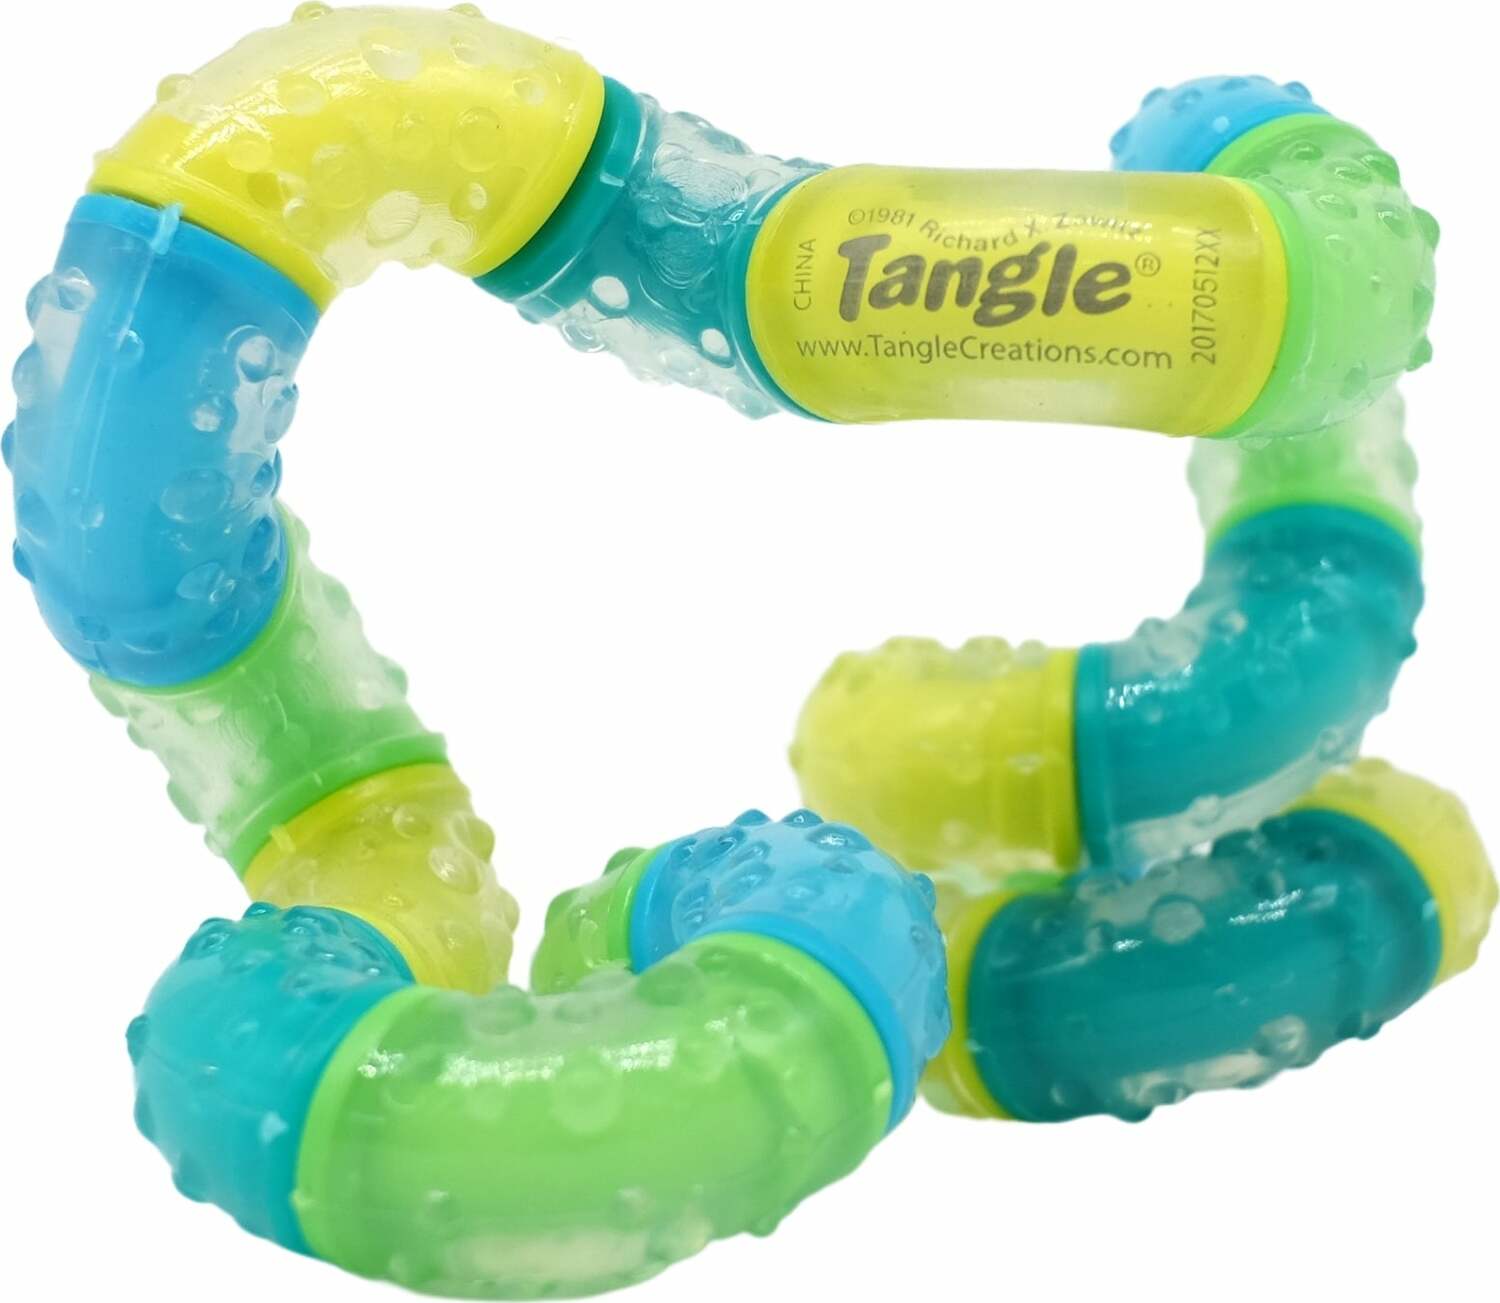 Tangle BrainTools Think - Assorted Colors (each sold individually)